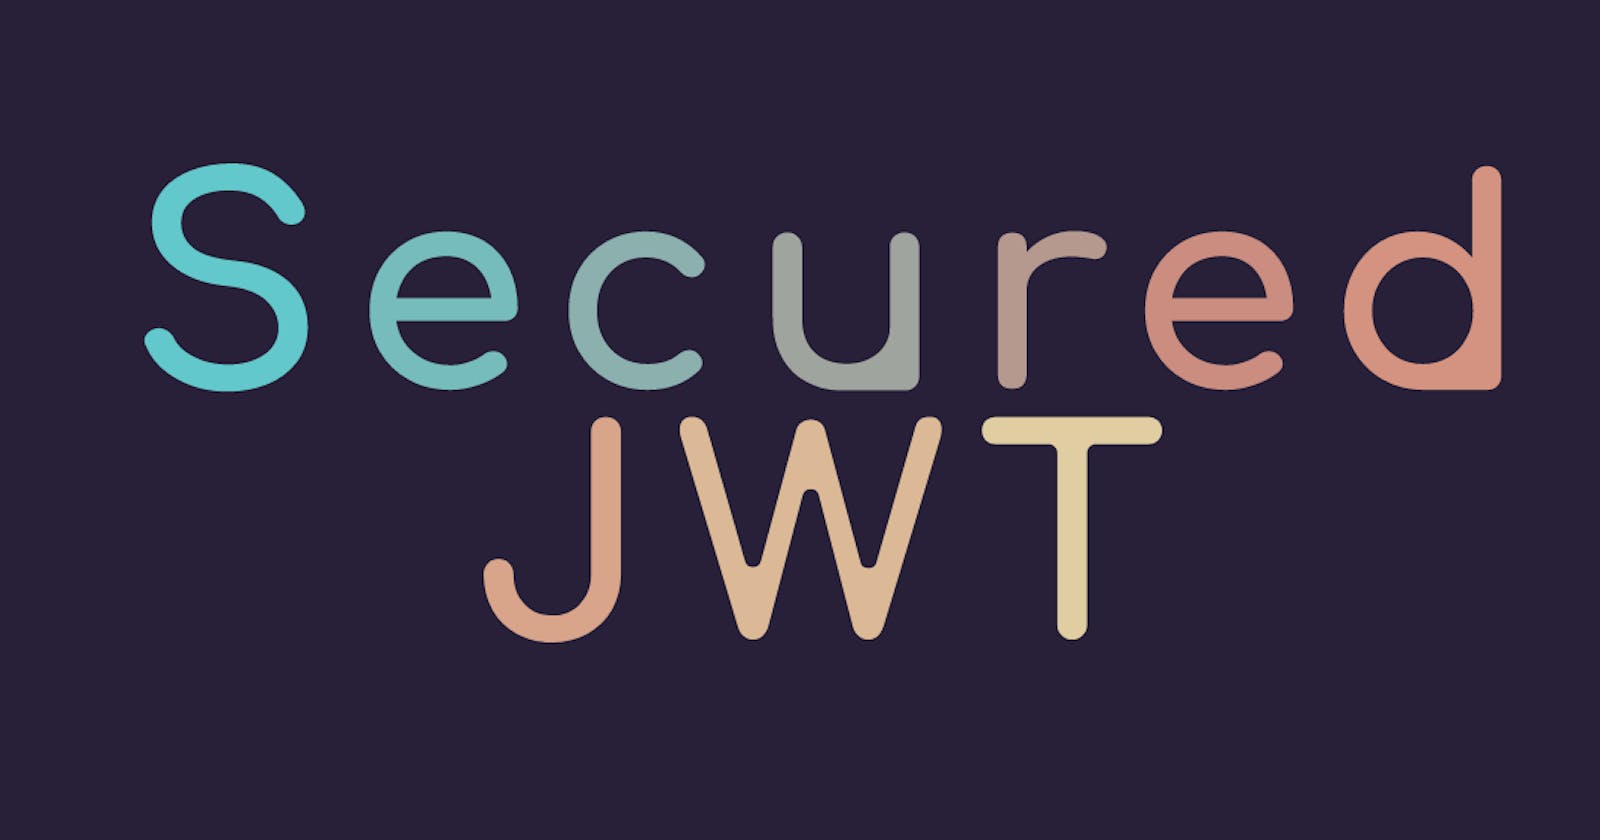 Securing your JSON Web Tokens the correct way.